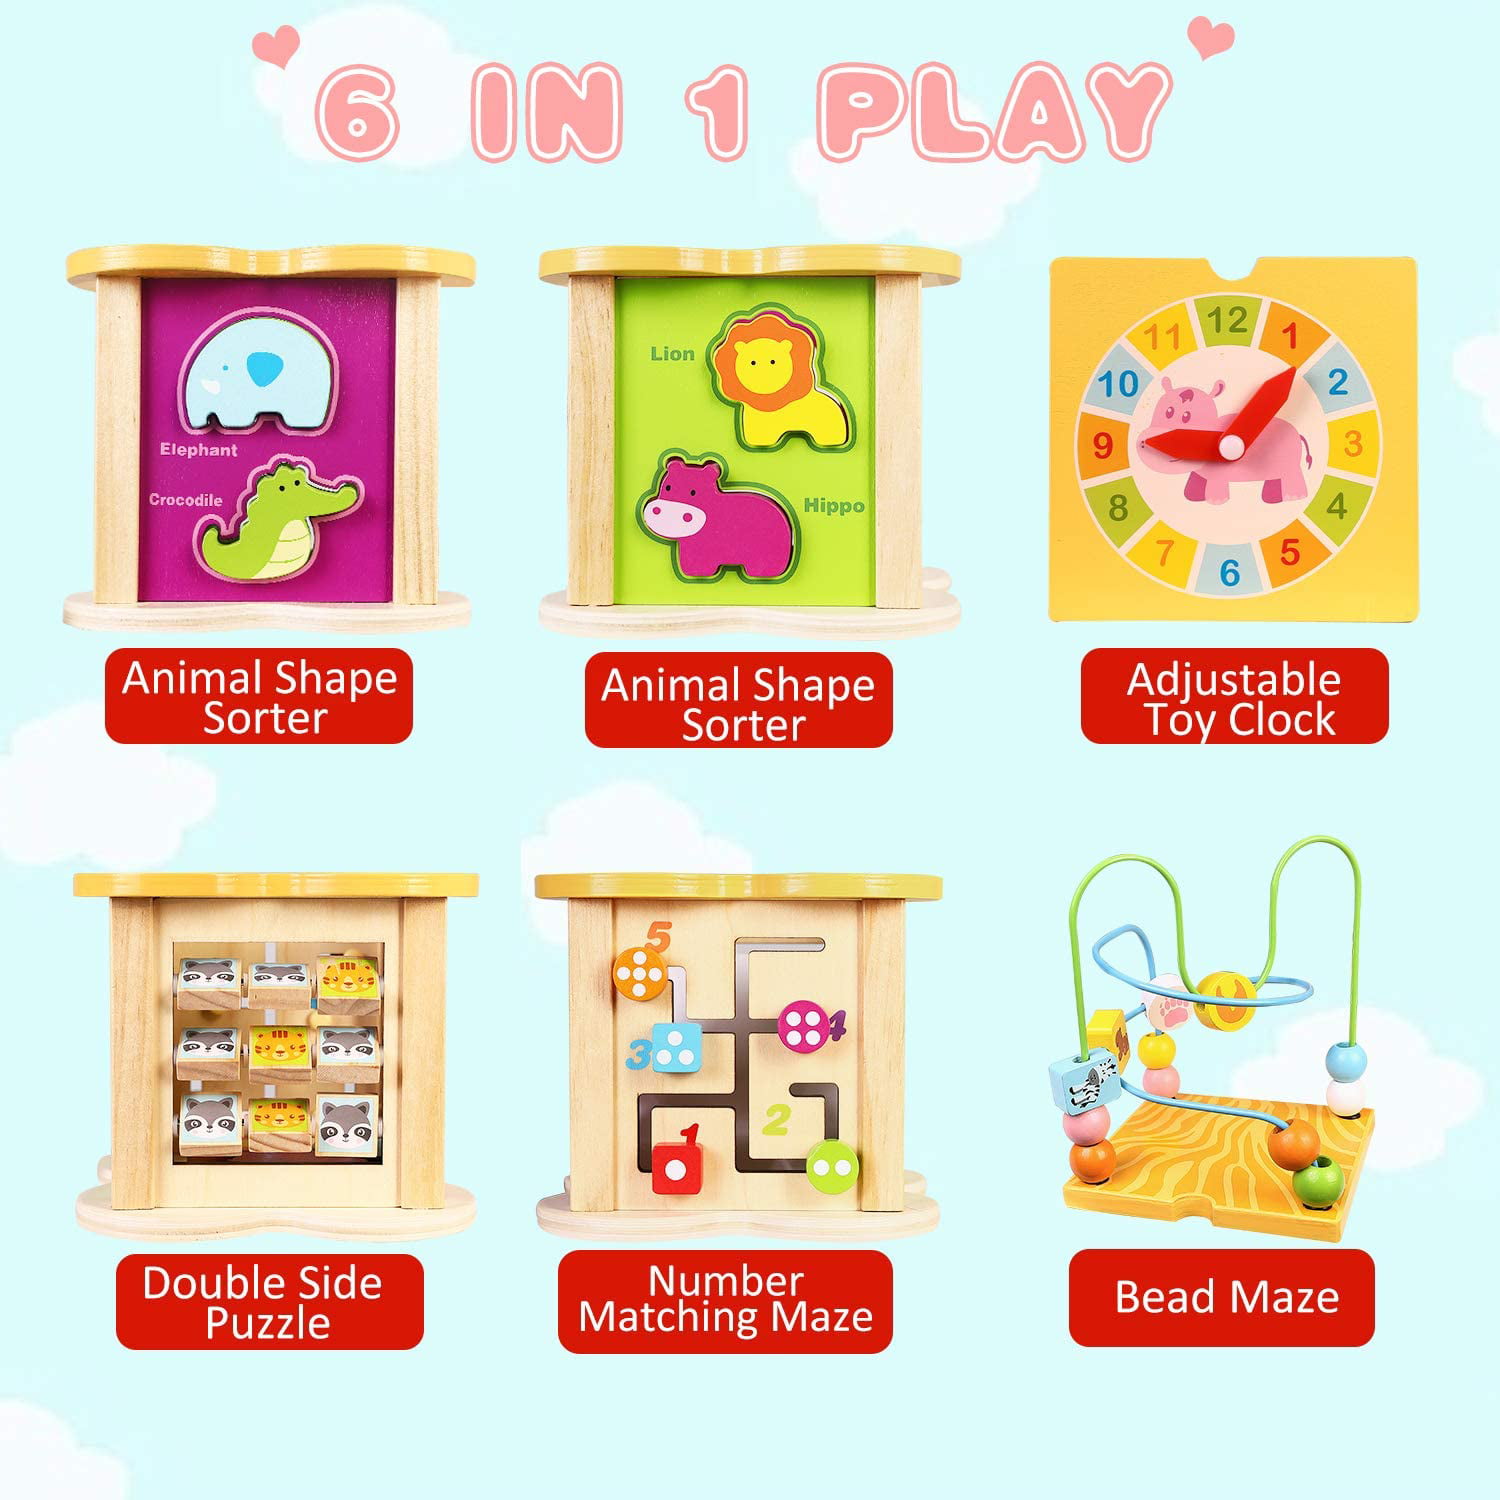 Baby Activity Cube Toys 6-in-1 Play Center Small Wooden Bead Maze Animal Shape Sorter Clock Learning Developmental Montessori Toys Gifts for 1 2 Year Old 12 Month Infant Toddler Kids Boy Girl 